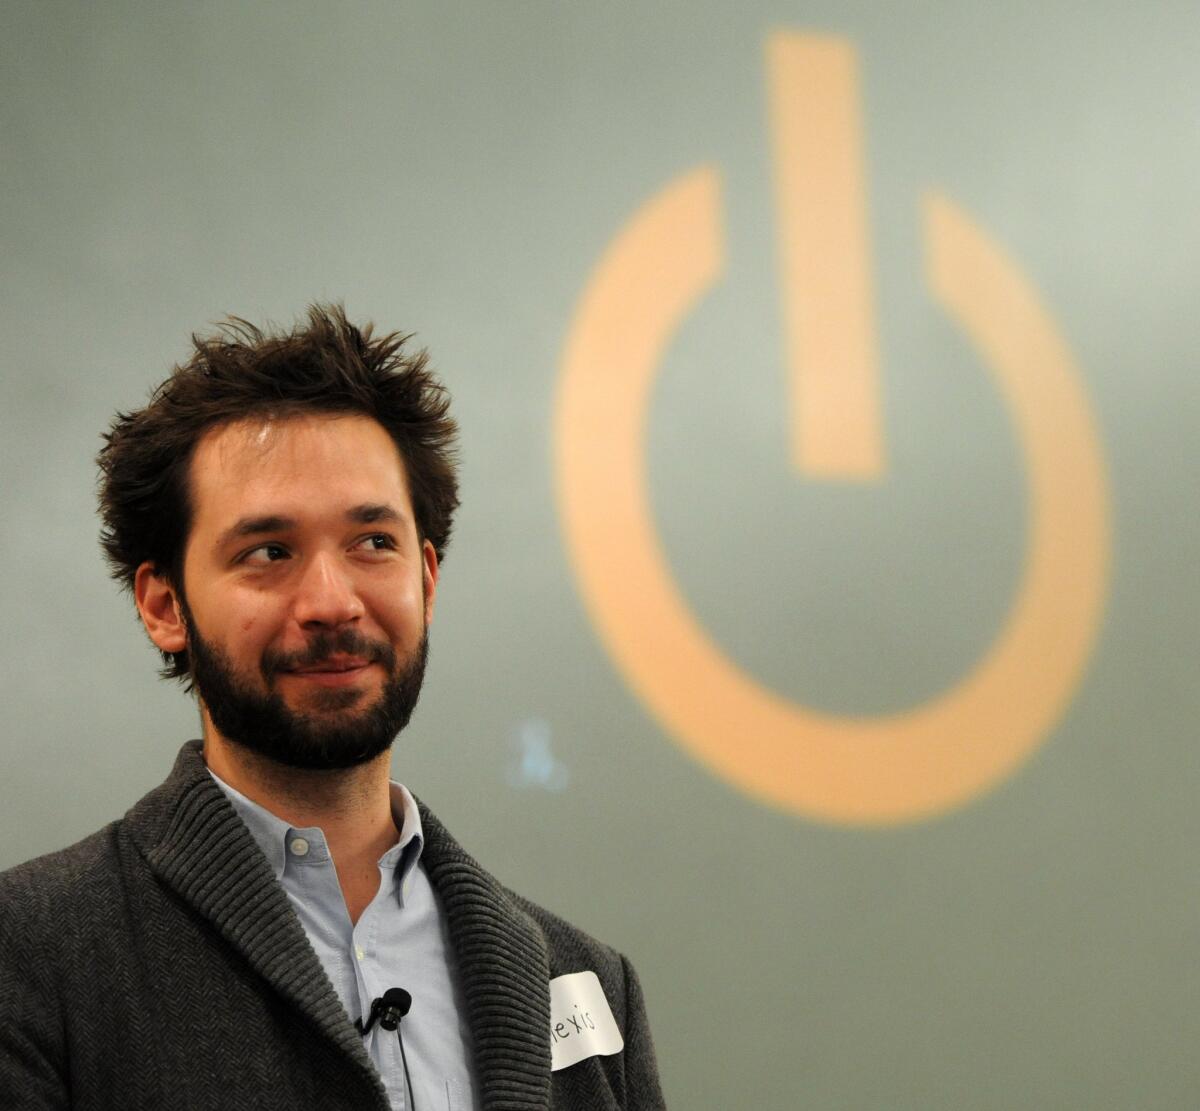 Reddit co-founder Alexis Ohanian has left the website's board of directors.